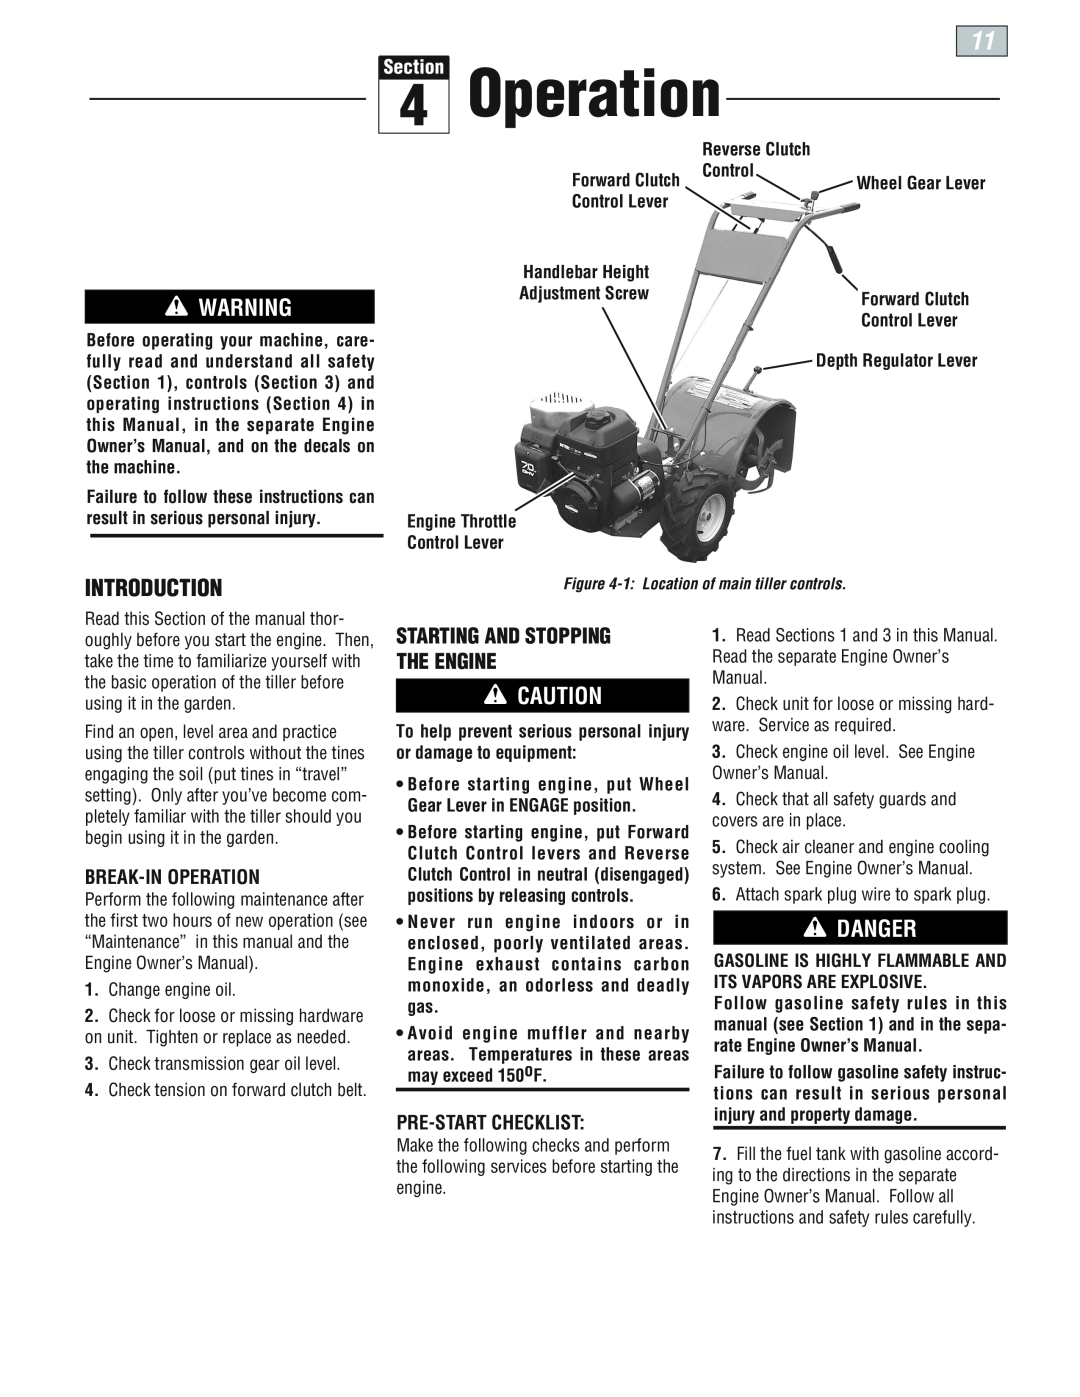 Troy-Bilt E66M PonyES manual Starting And Stopping The Engine, Break-In Operation, Pre-Start Checklist, Reverse Clutch 